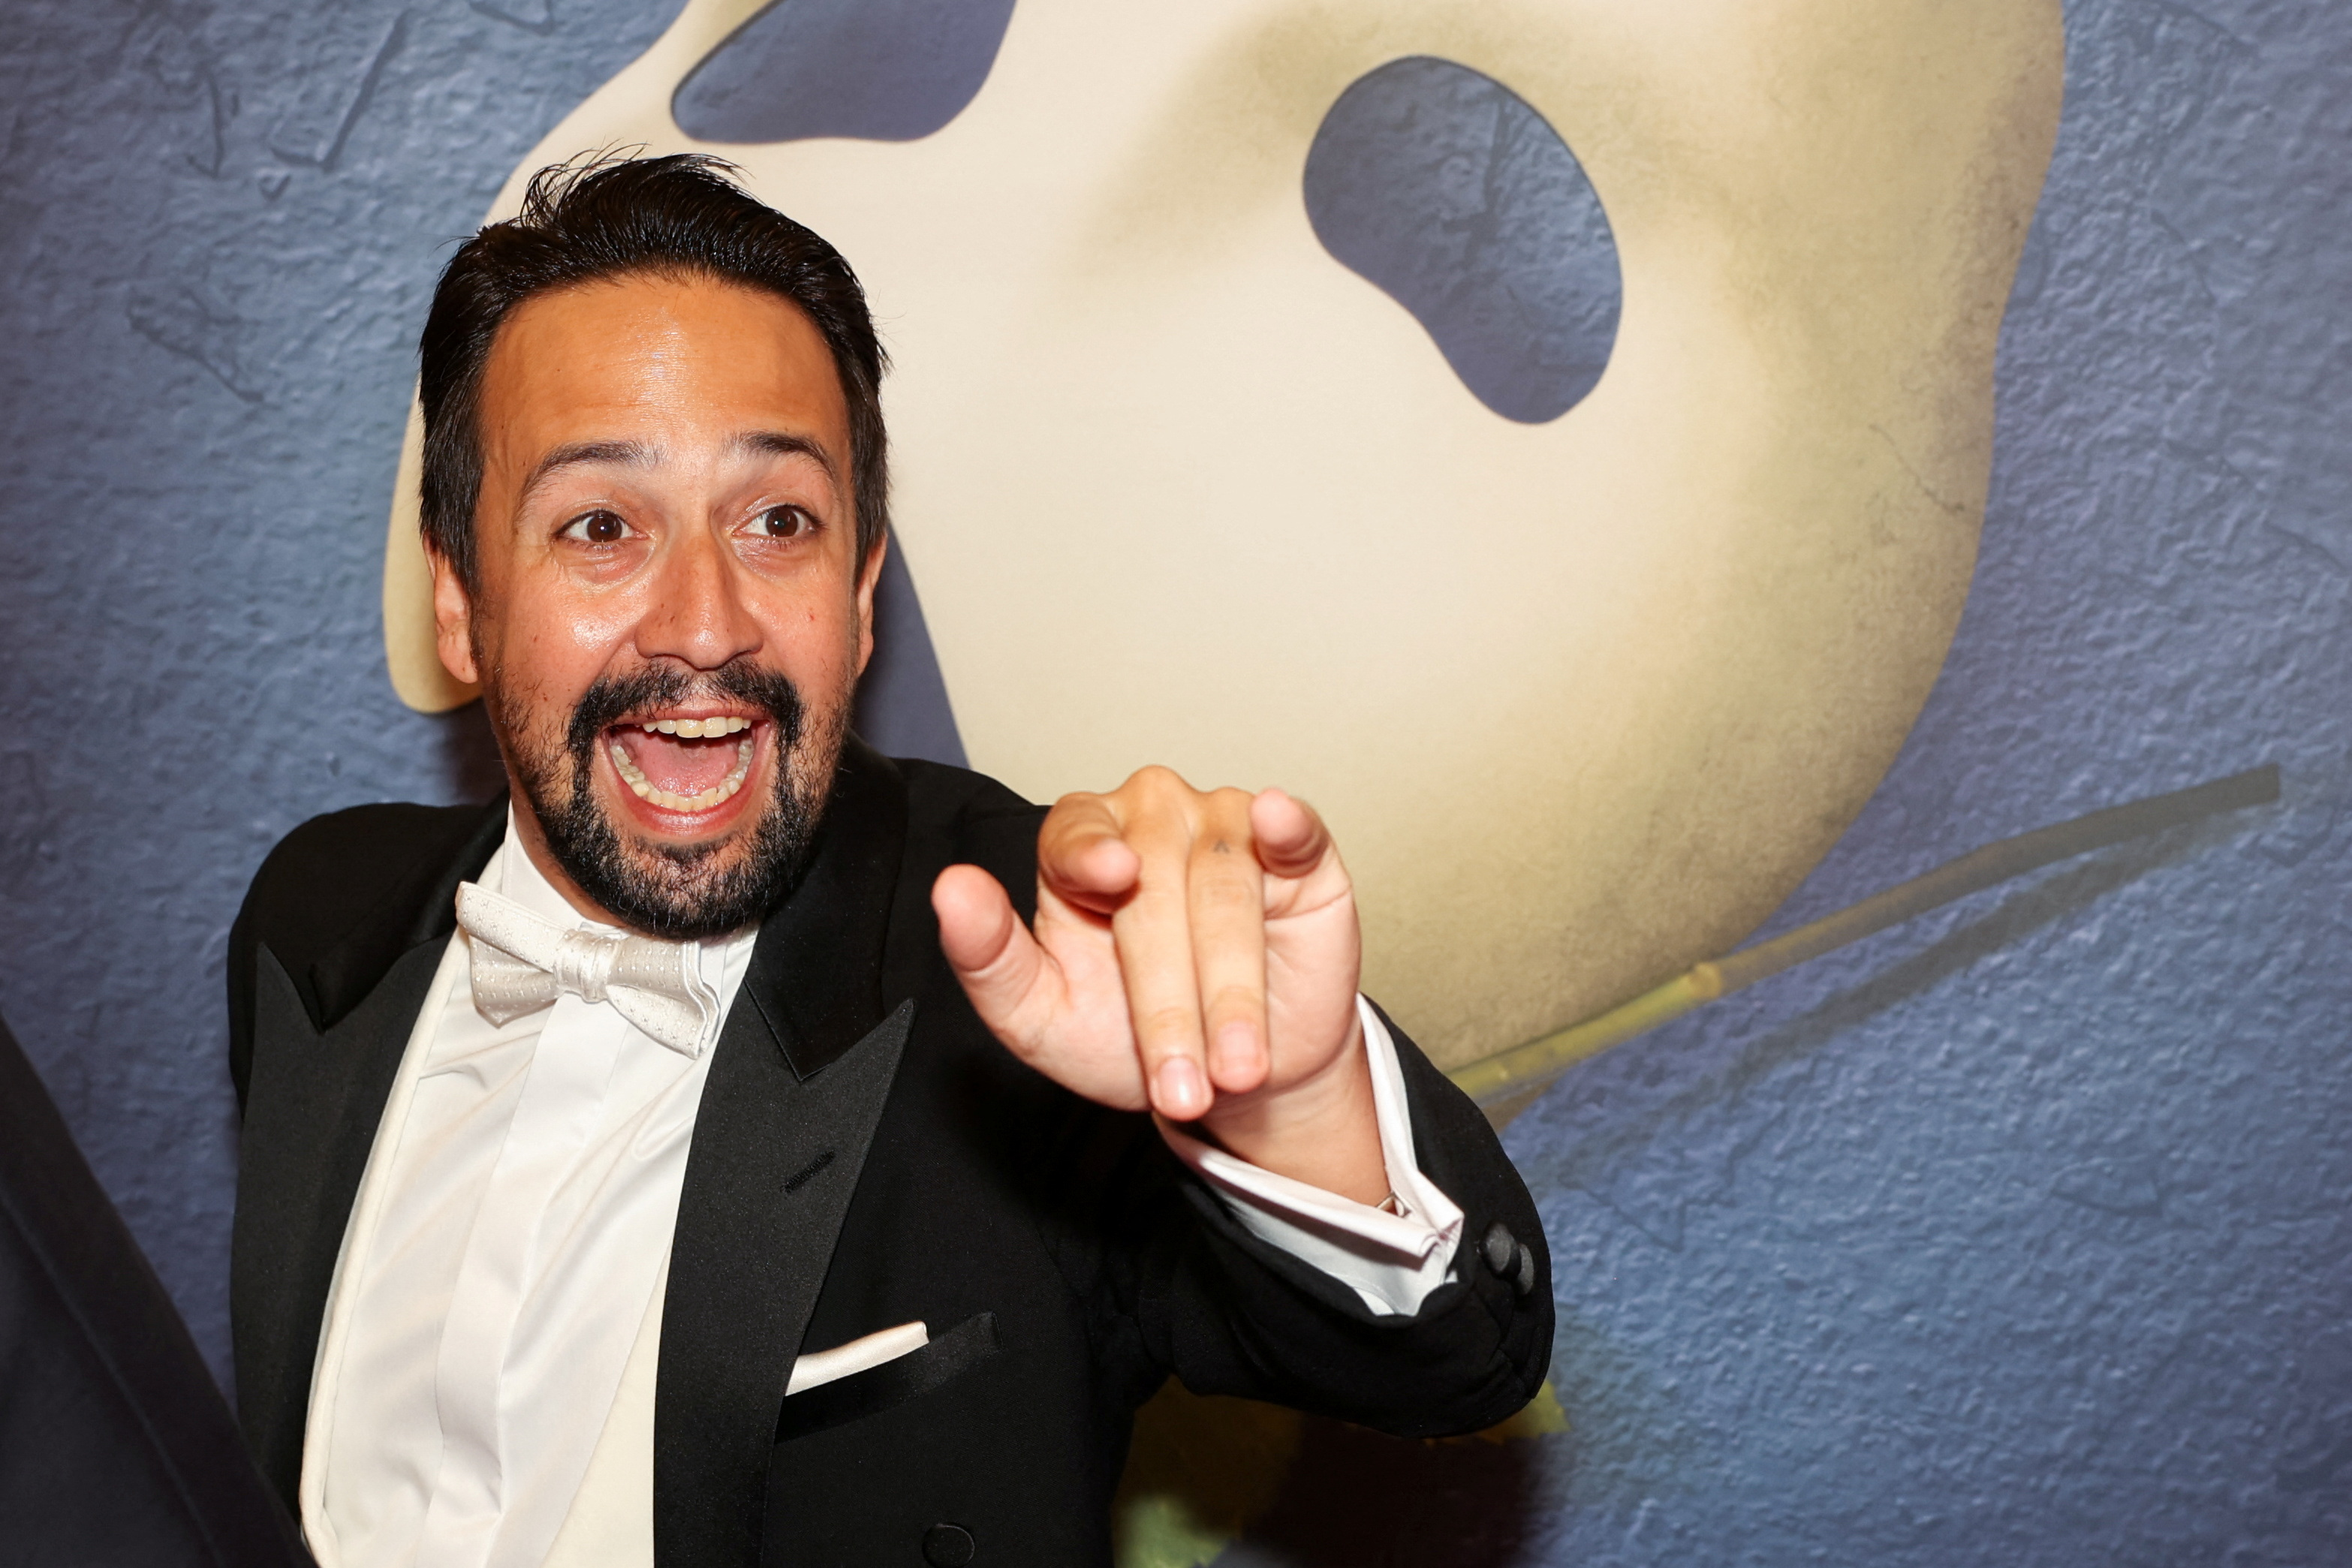 The actor and producer, Lin-Manuel Miranda, during his time on the red carpet.  (PHOTO: REUTERS/Caitlin Ochs)